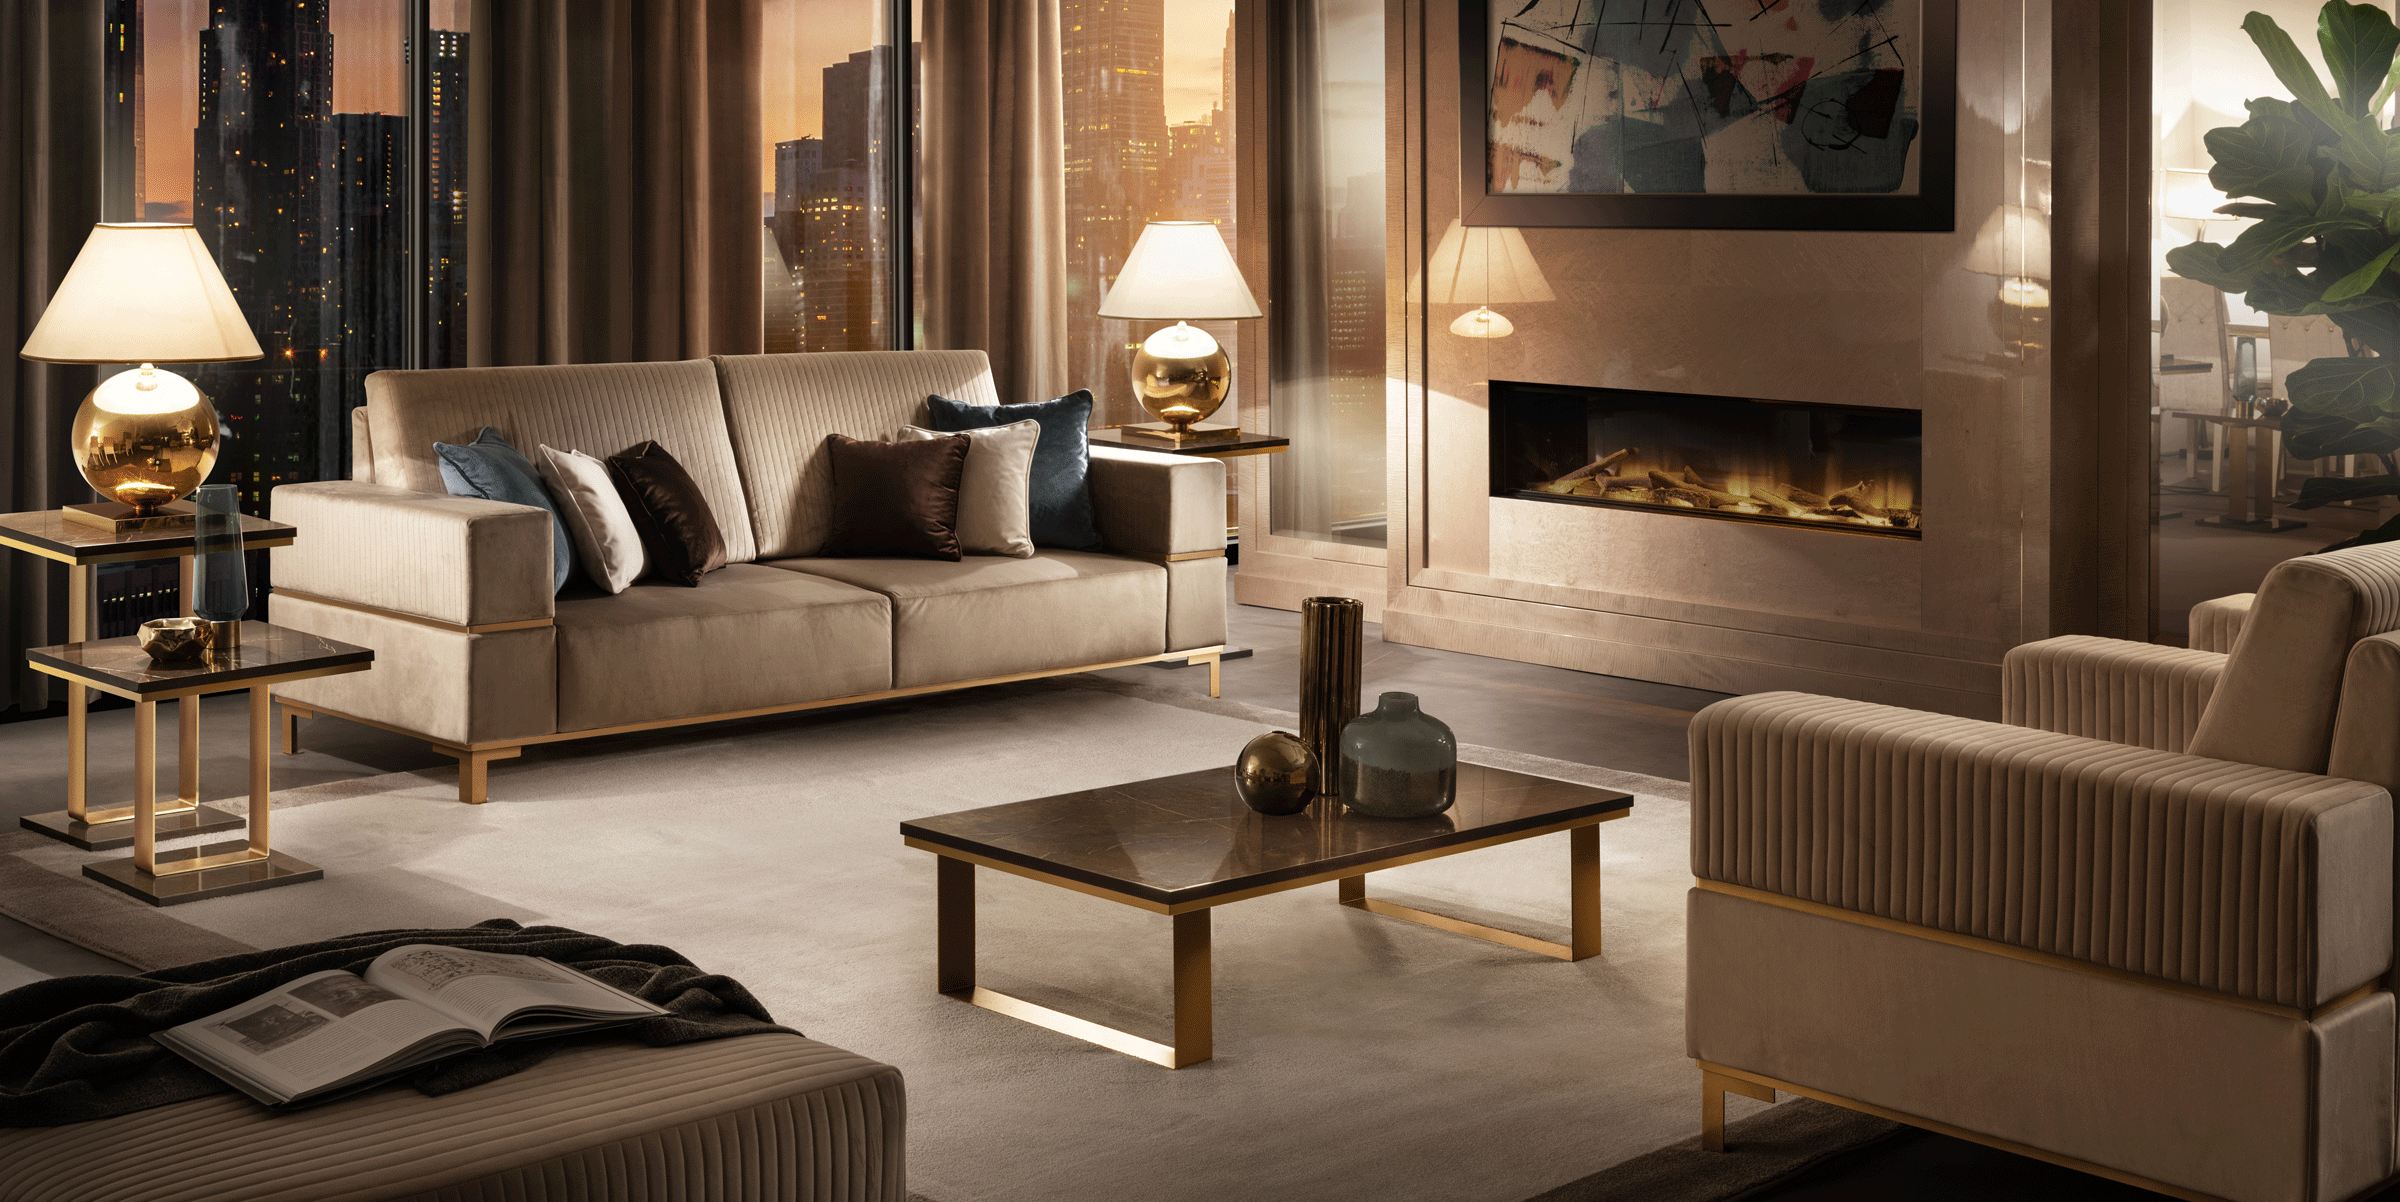 Living Room Furniture Coffee and End Tables Essenza Living by Arredoclassic, Italy